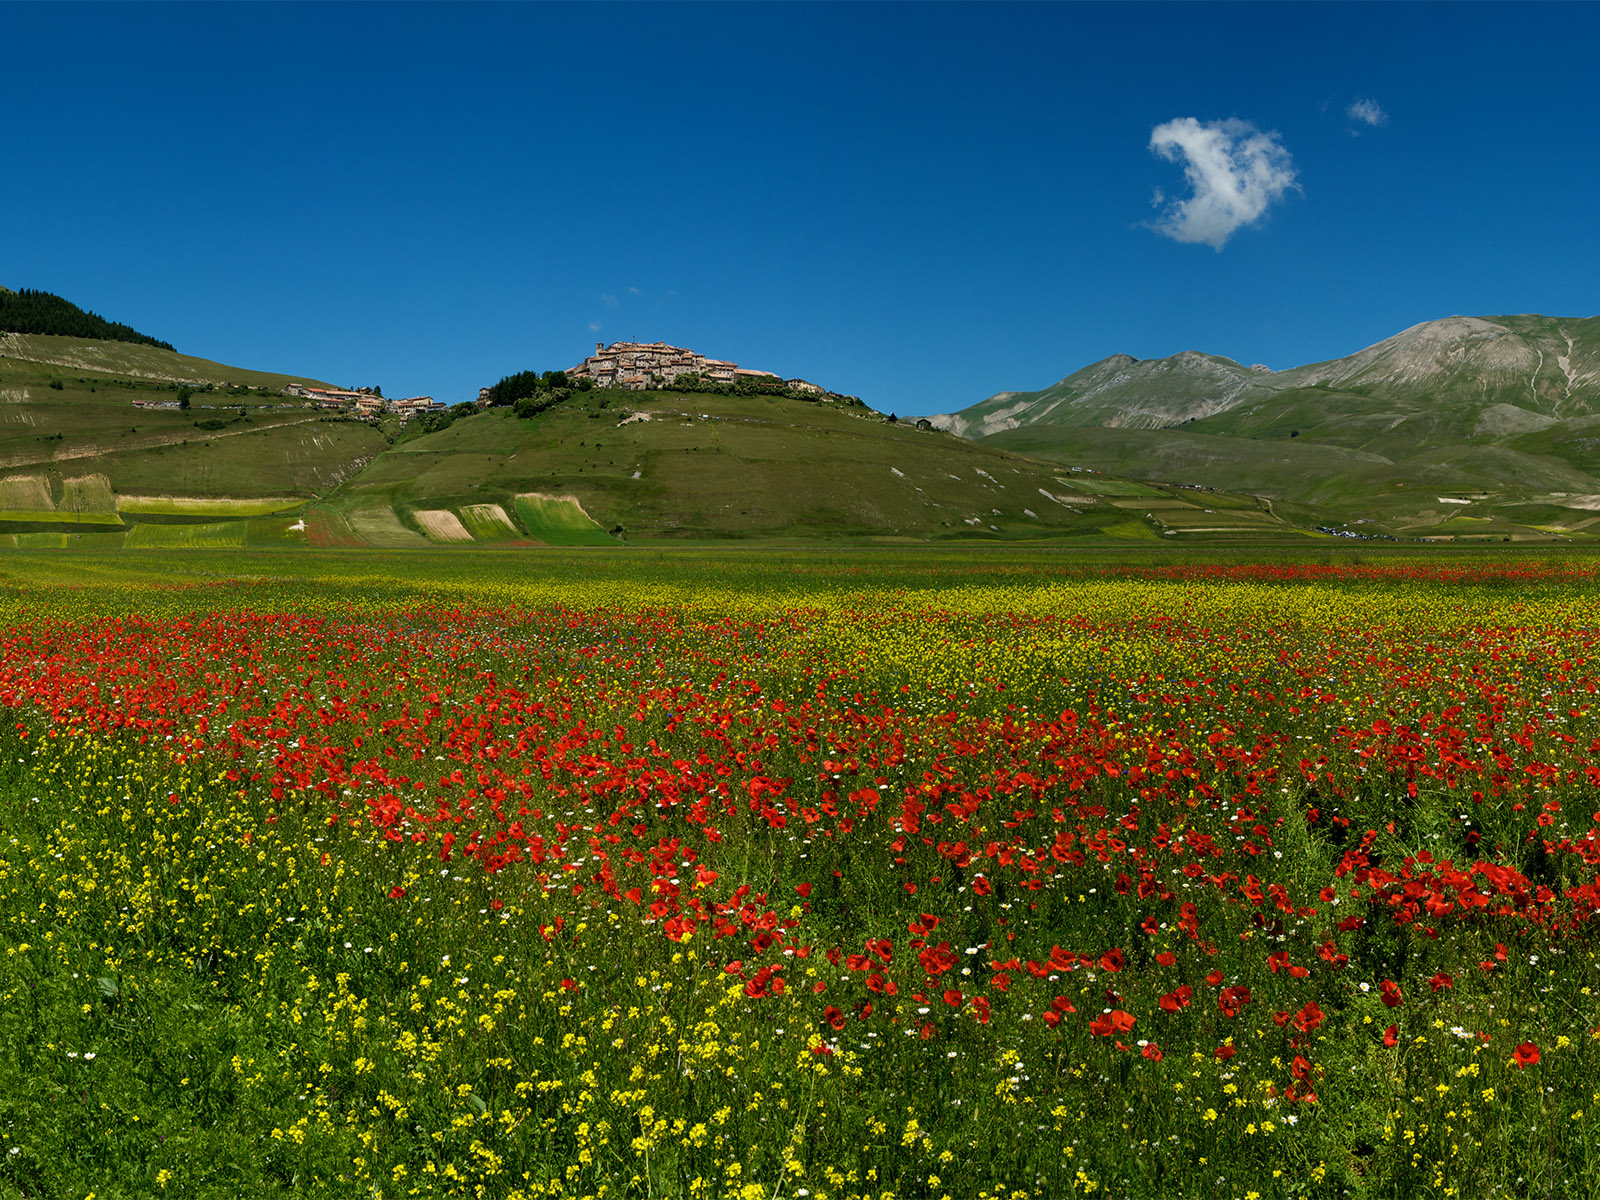 flower fields in full bloom below the small town of Castelluccio in Umbria, Italy